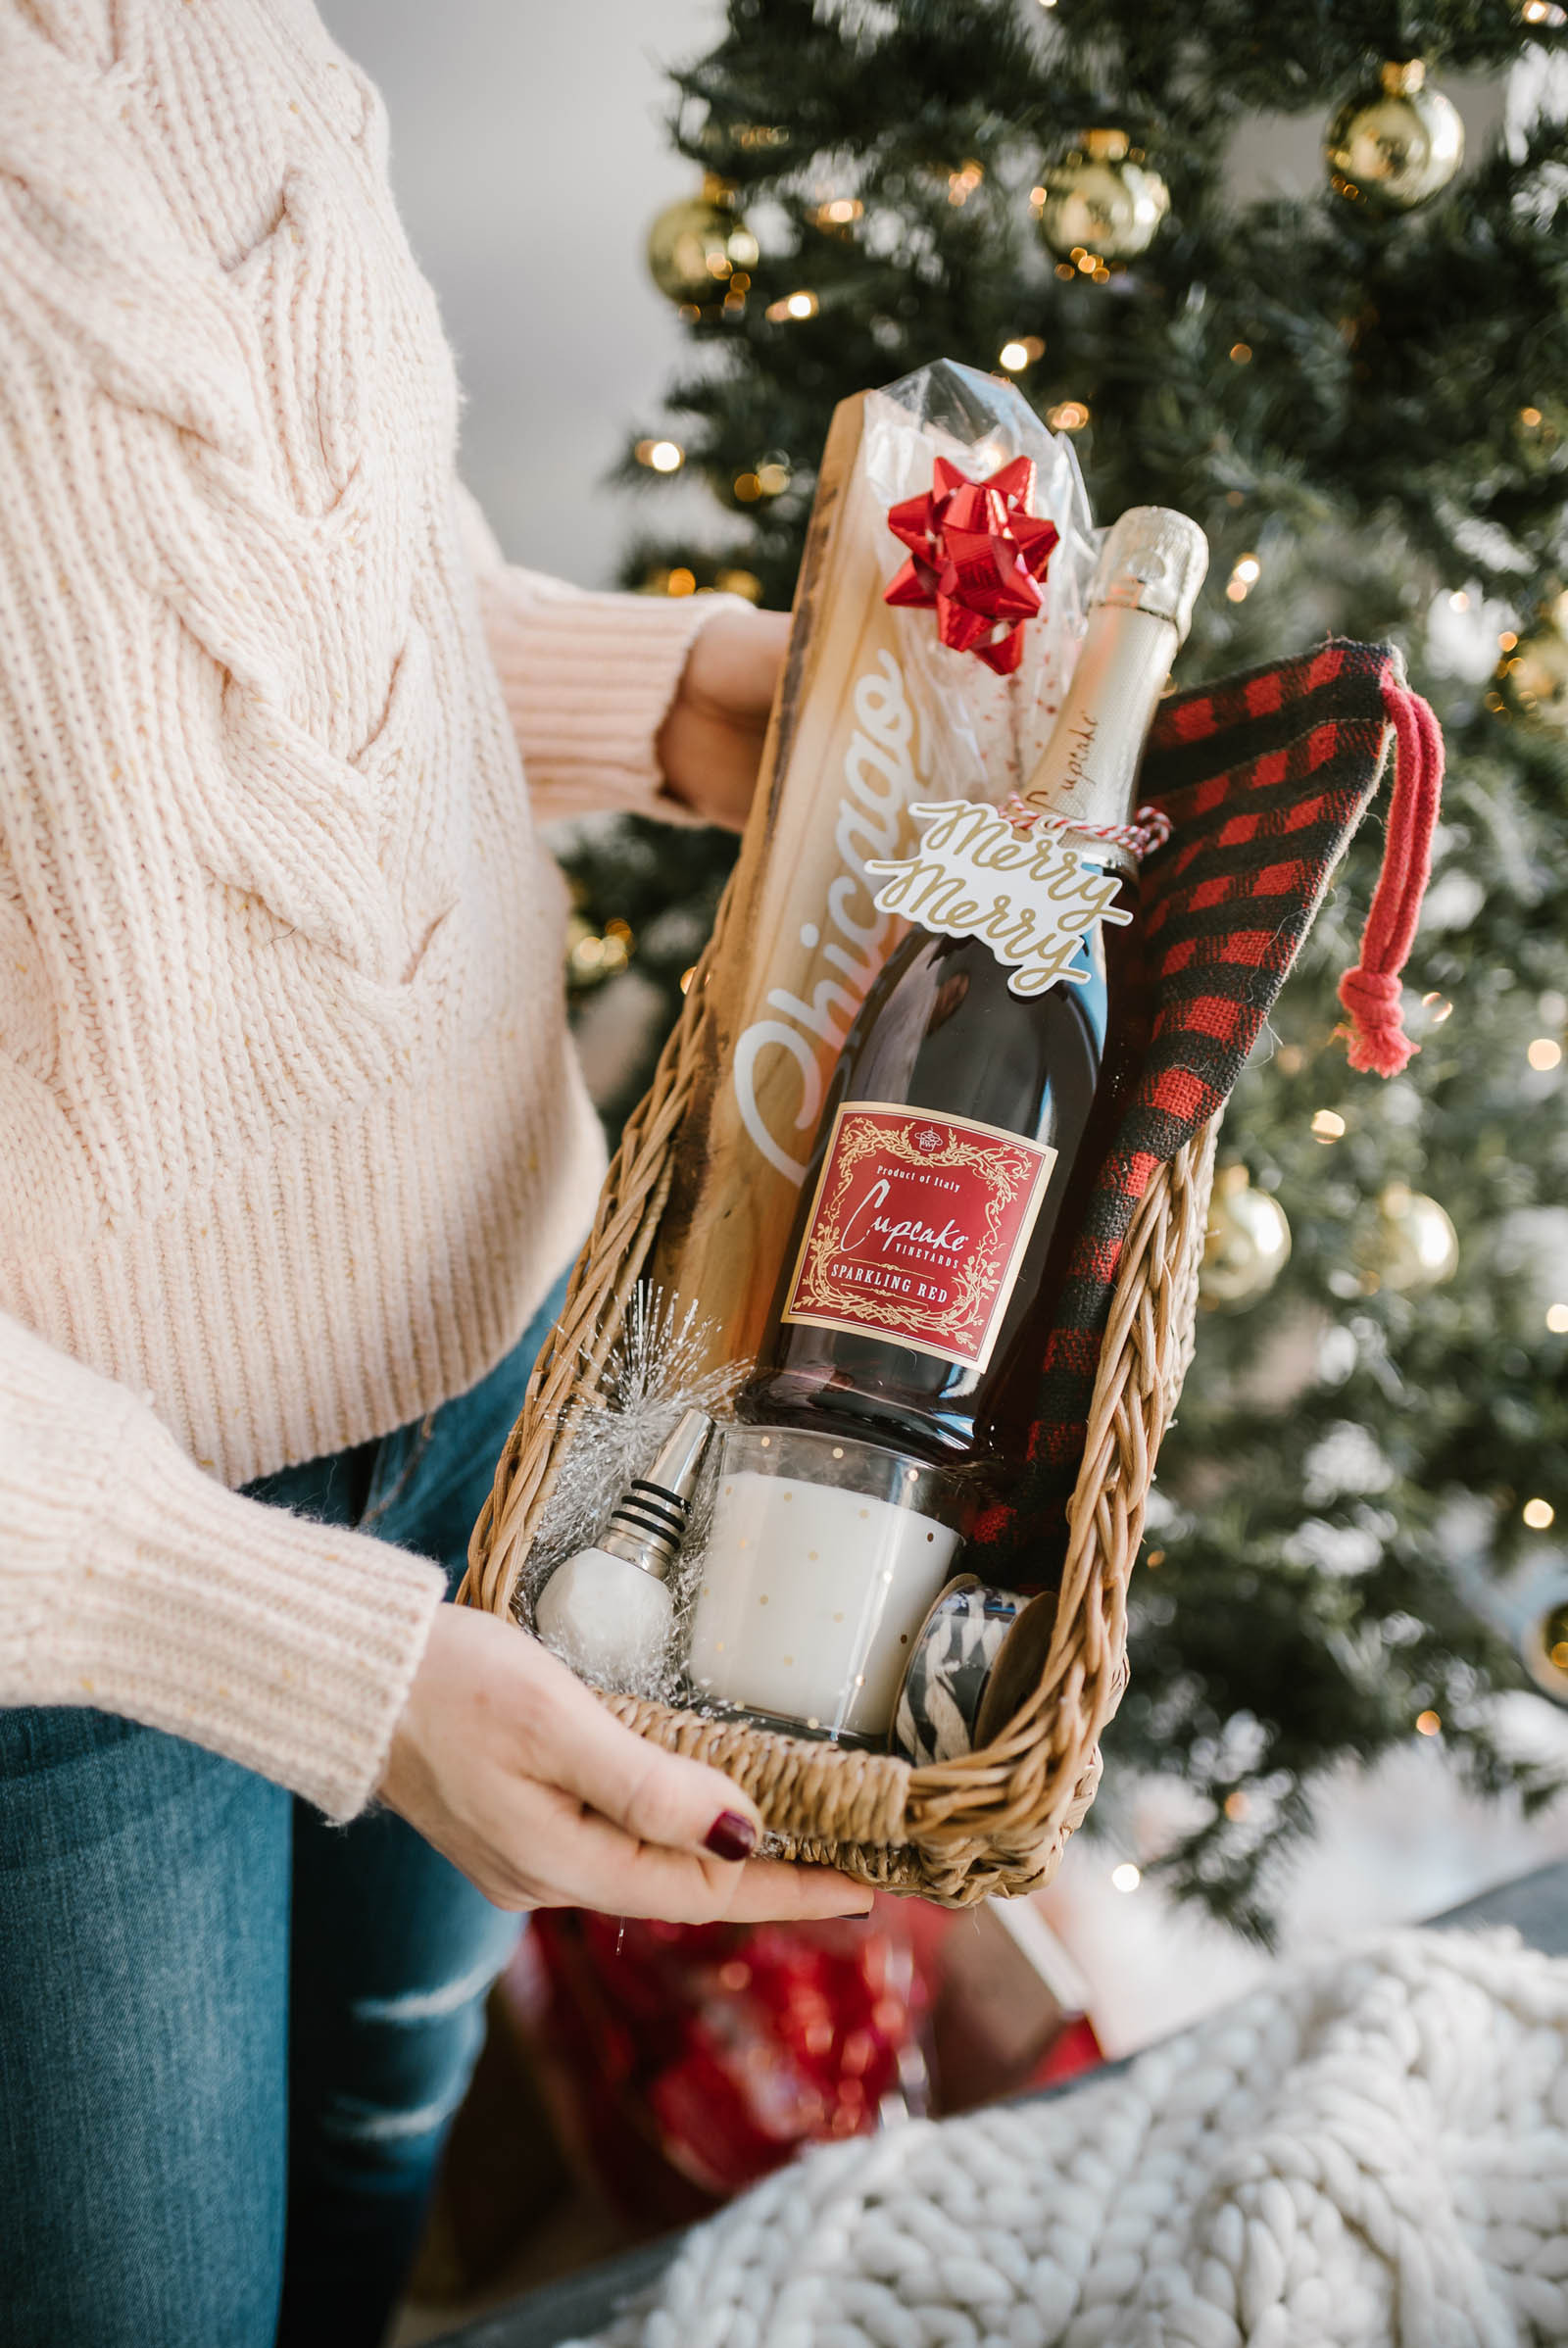 Making Gift Baskets Ideas
 Last Minute Holiday Idea Easy Homemade Gift Baskets